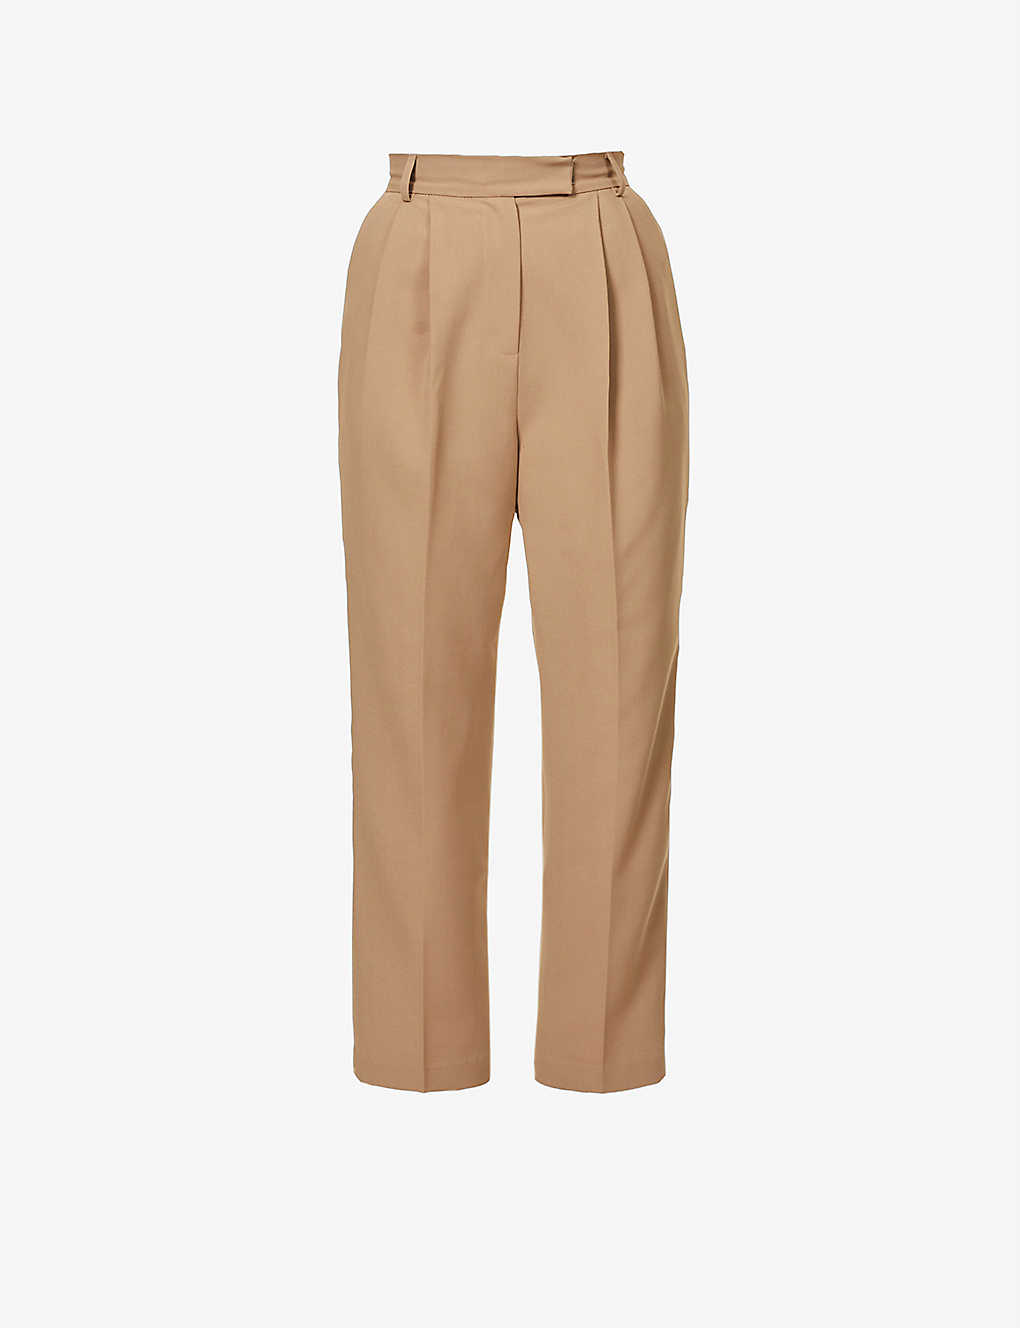 Shop The Frankie Shop Frankie Shop Women's Latte Bea Tapered High-rise Stretch-crepe Trousers